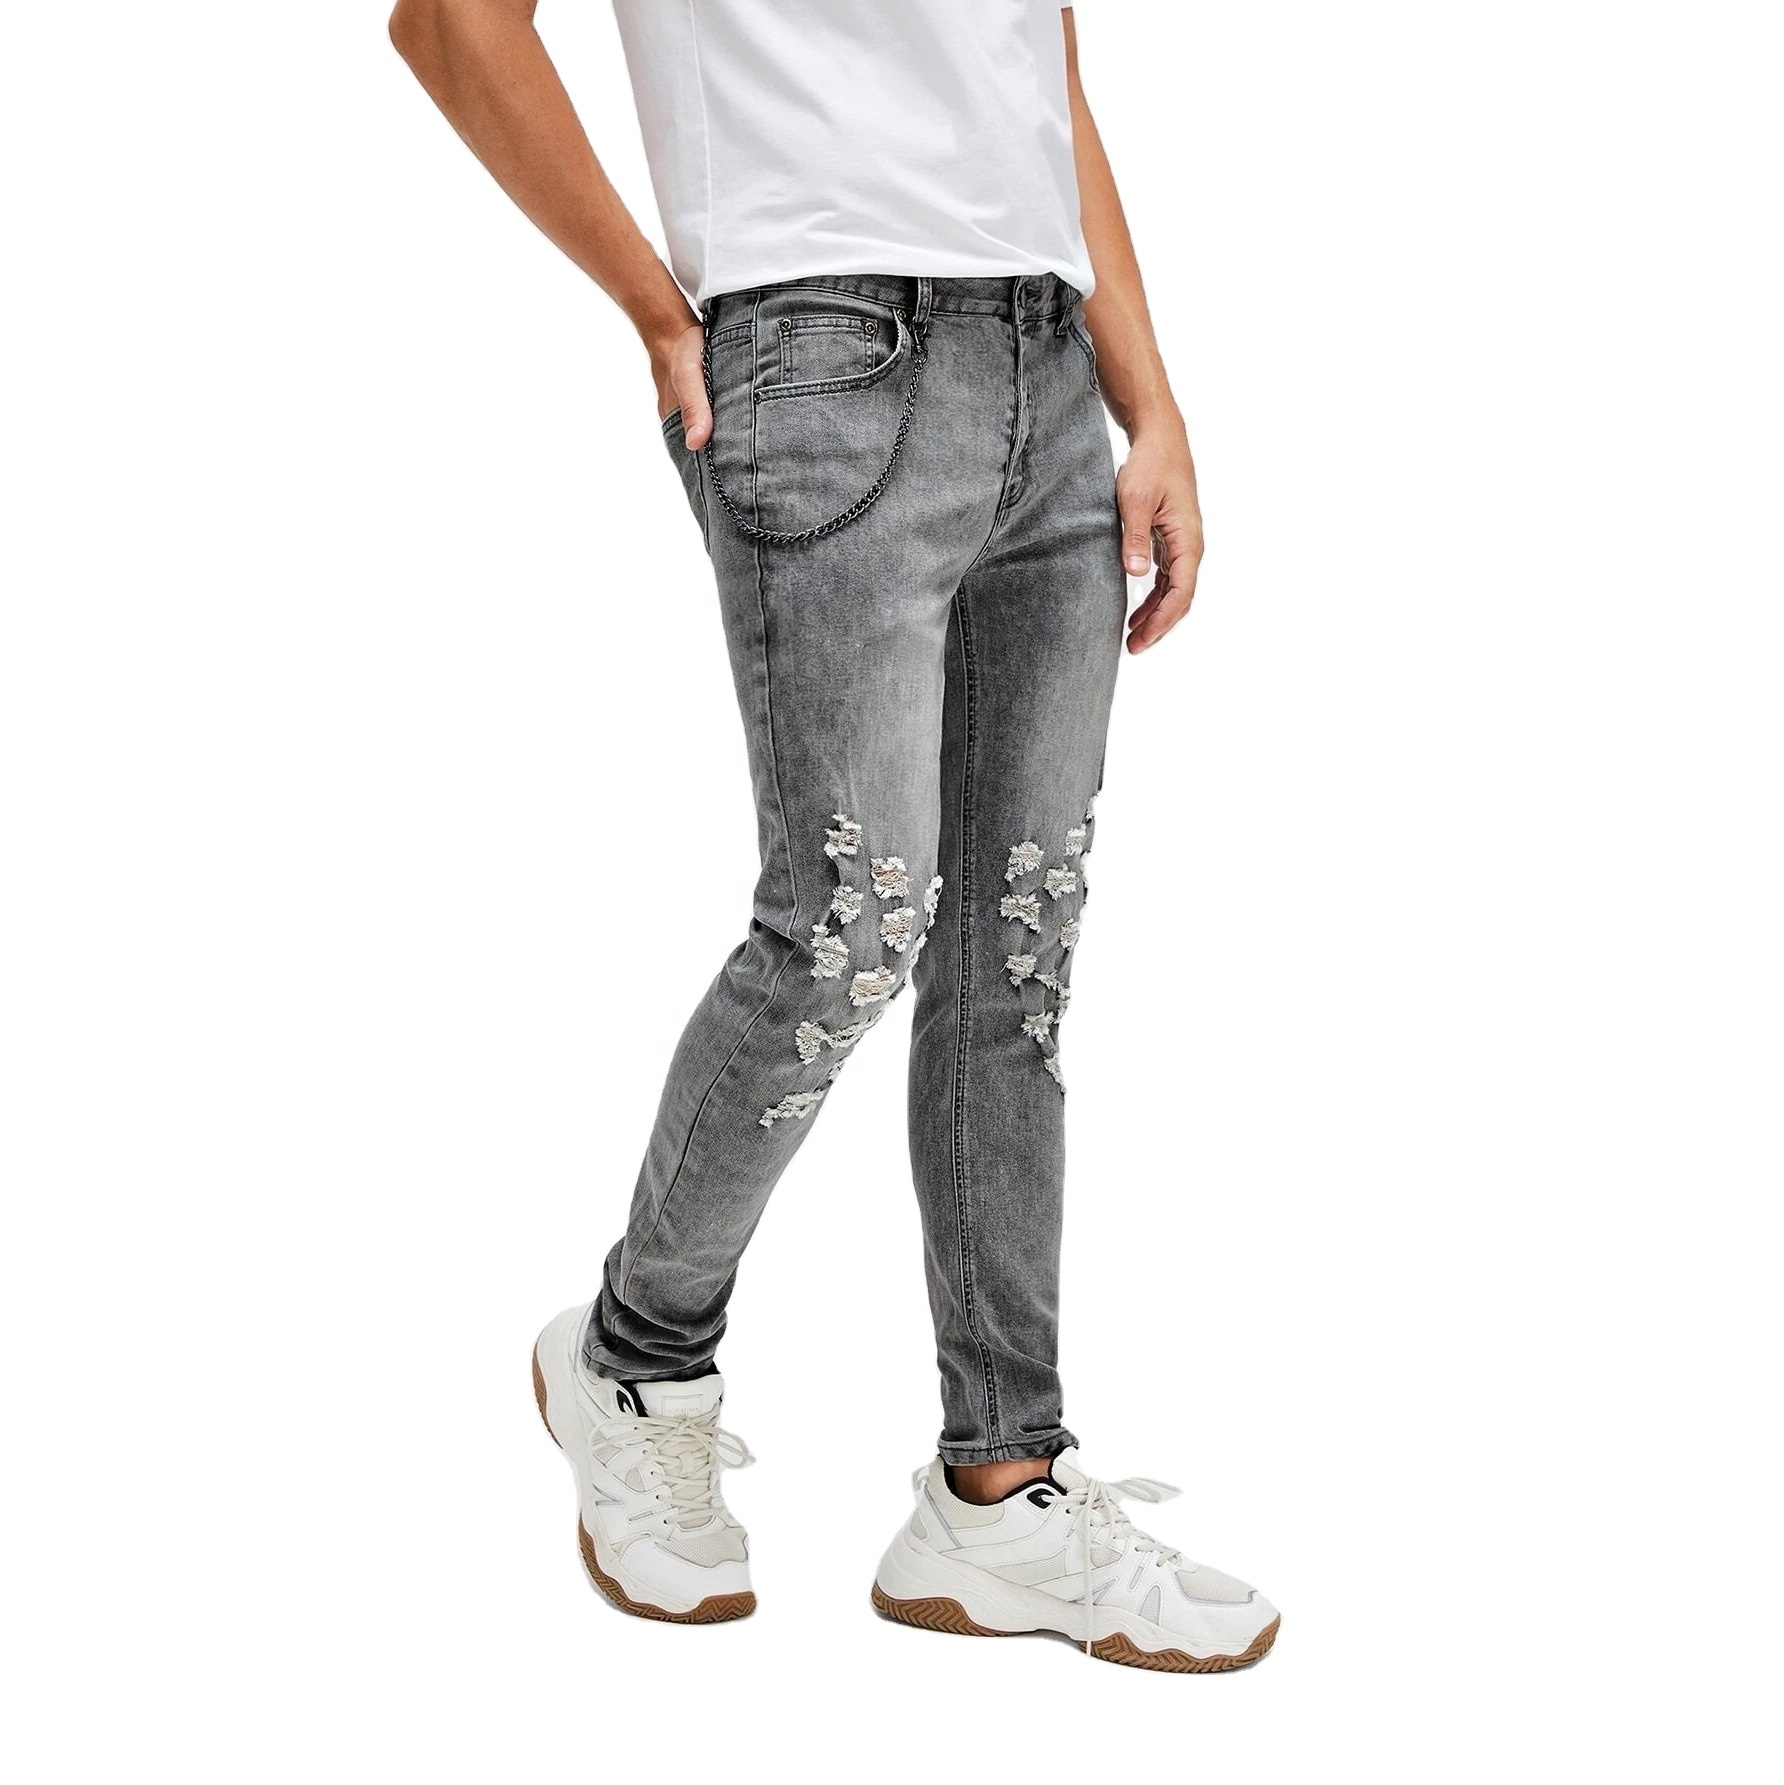 customize fashion jeans gray distressed ripped men jeans with waist chain